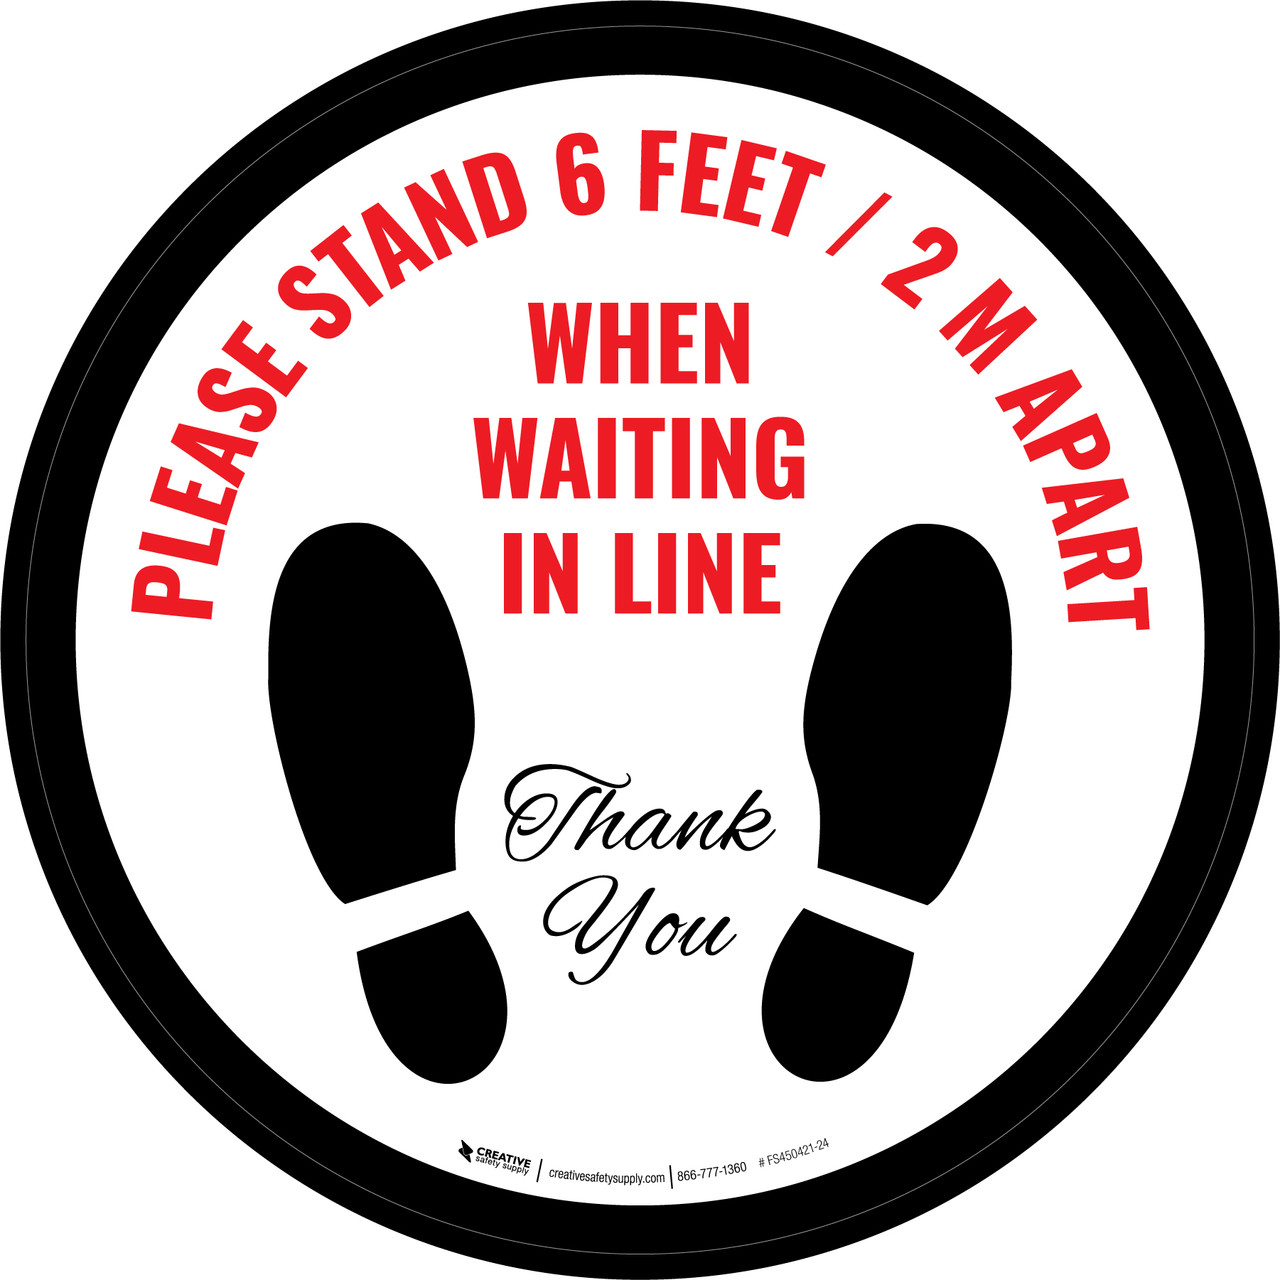 Please Stand Ft/2 m Apart When Waiting in Line Thank You with Icon  Circular Floor Sign